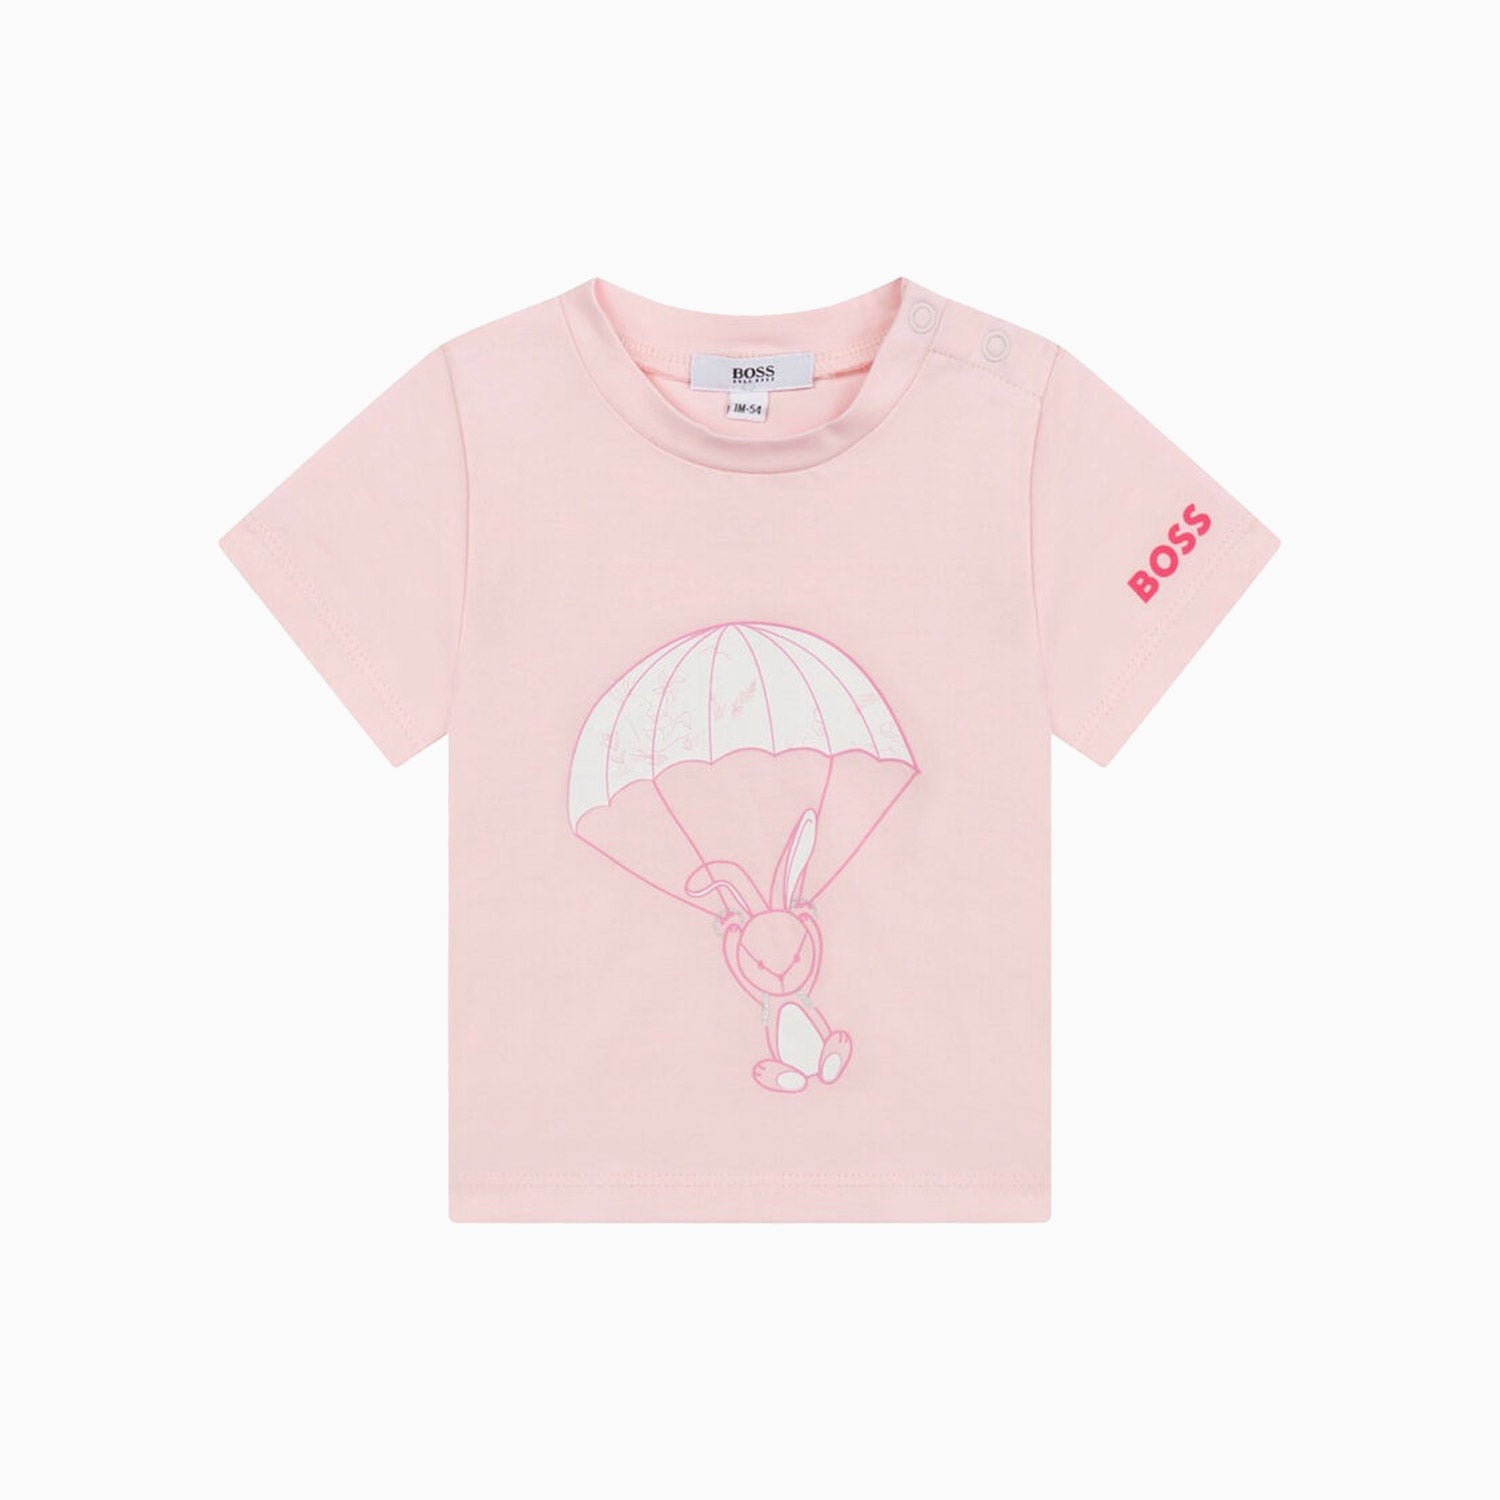 Hugo Boss Kid's T Shirt And Leggings Outfit - Color: Pink Pale - Kids Premium Clothing -